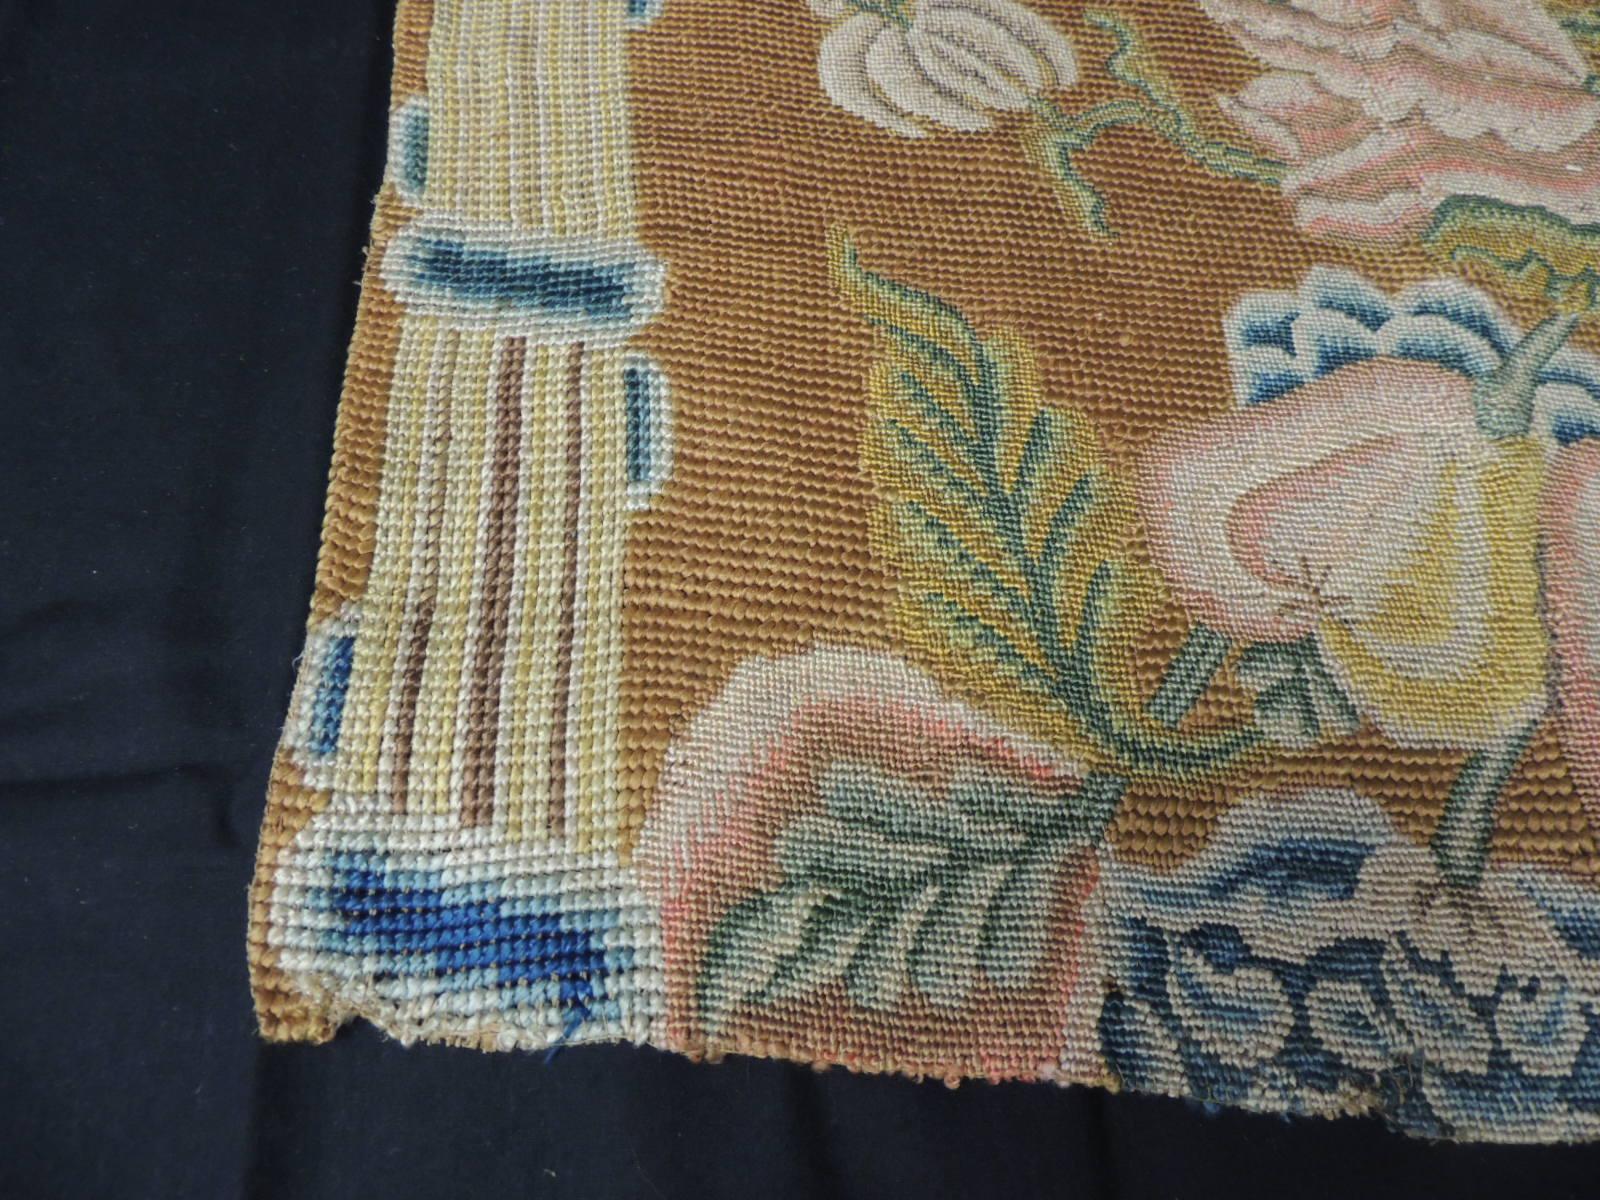 Antique Floral Needlework Tapestry Fragment, depicting flowers and trellis.
In shades of tan, blue, gold, pink green and yellow.
Sold as is.
Size:  16.5